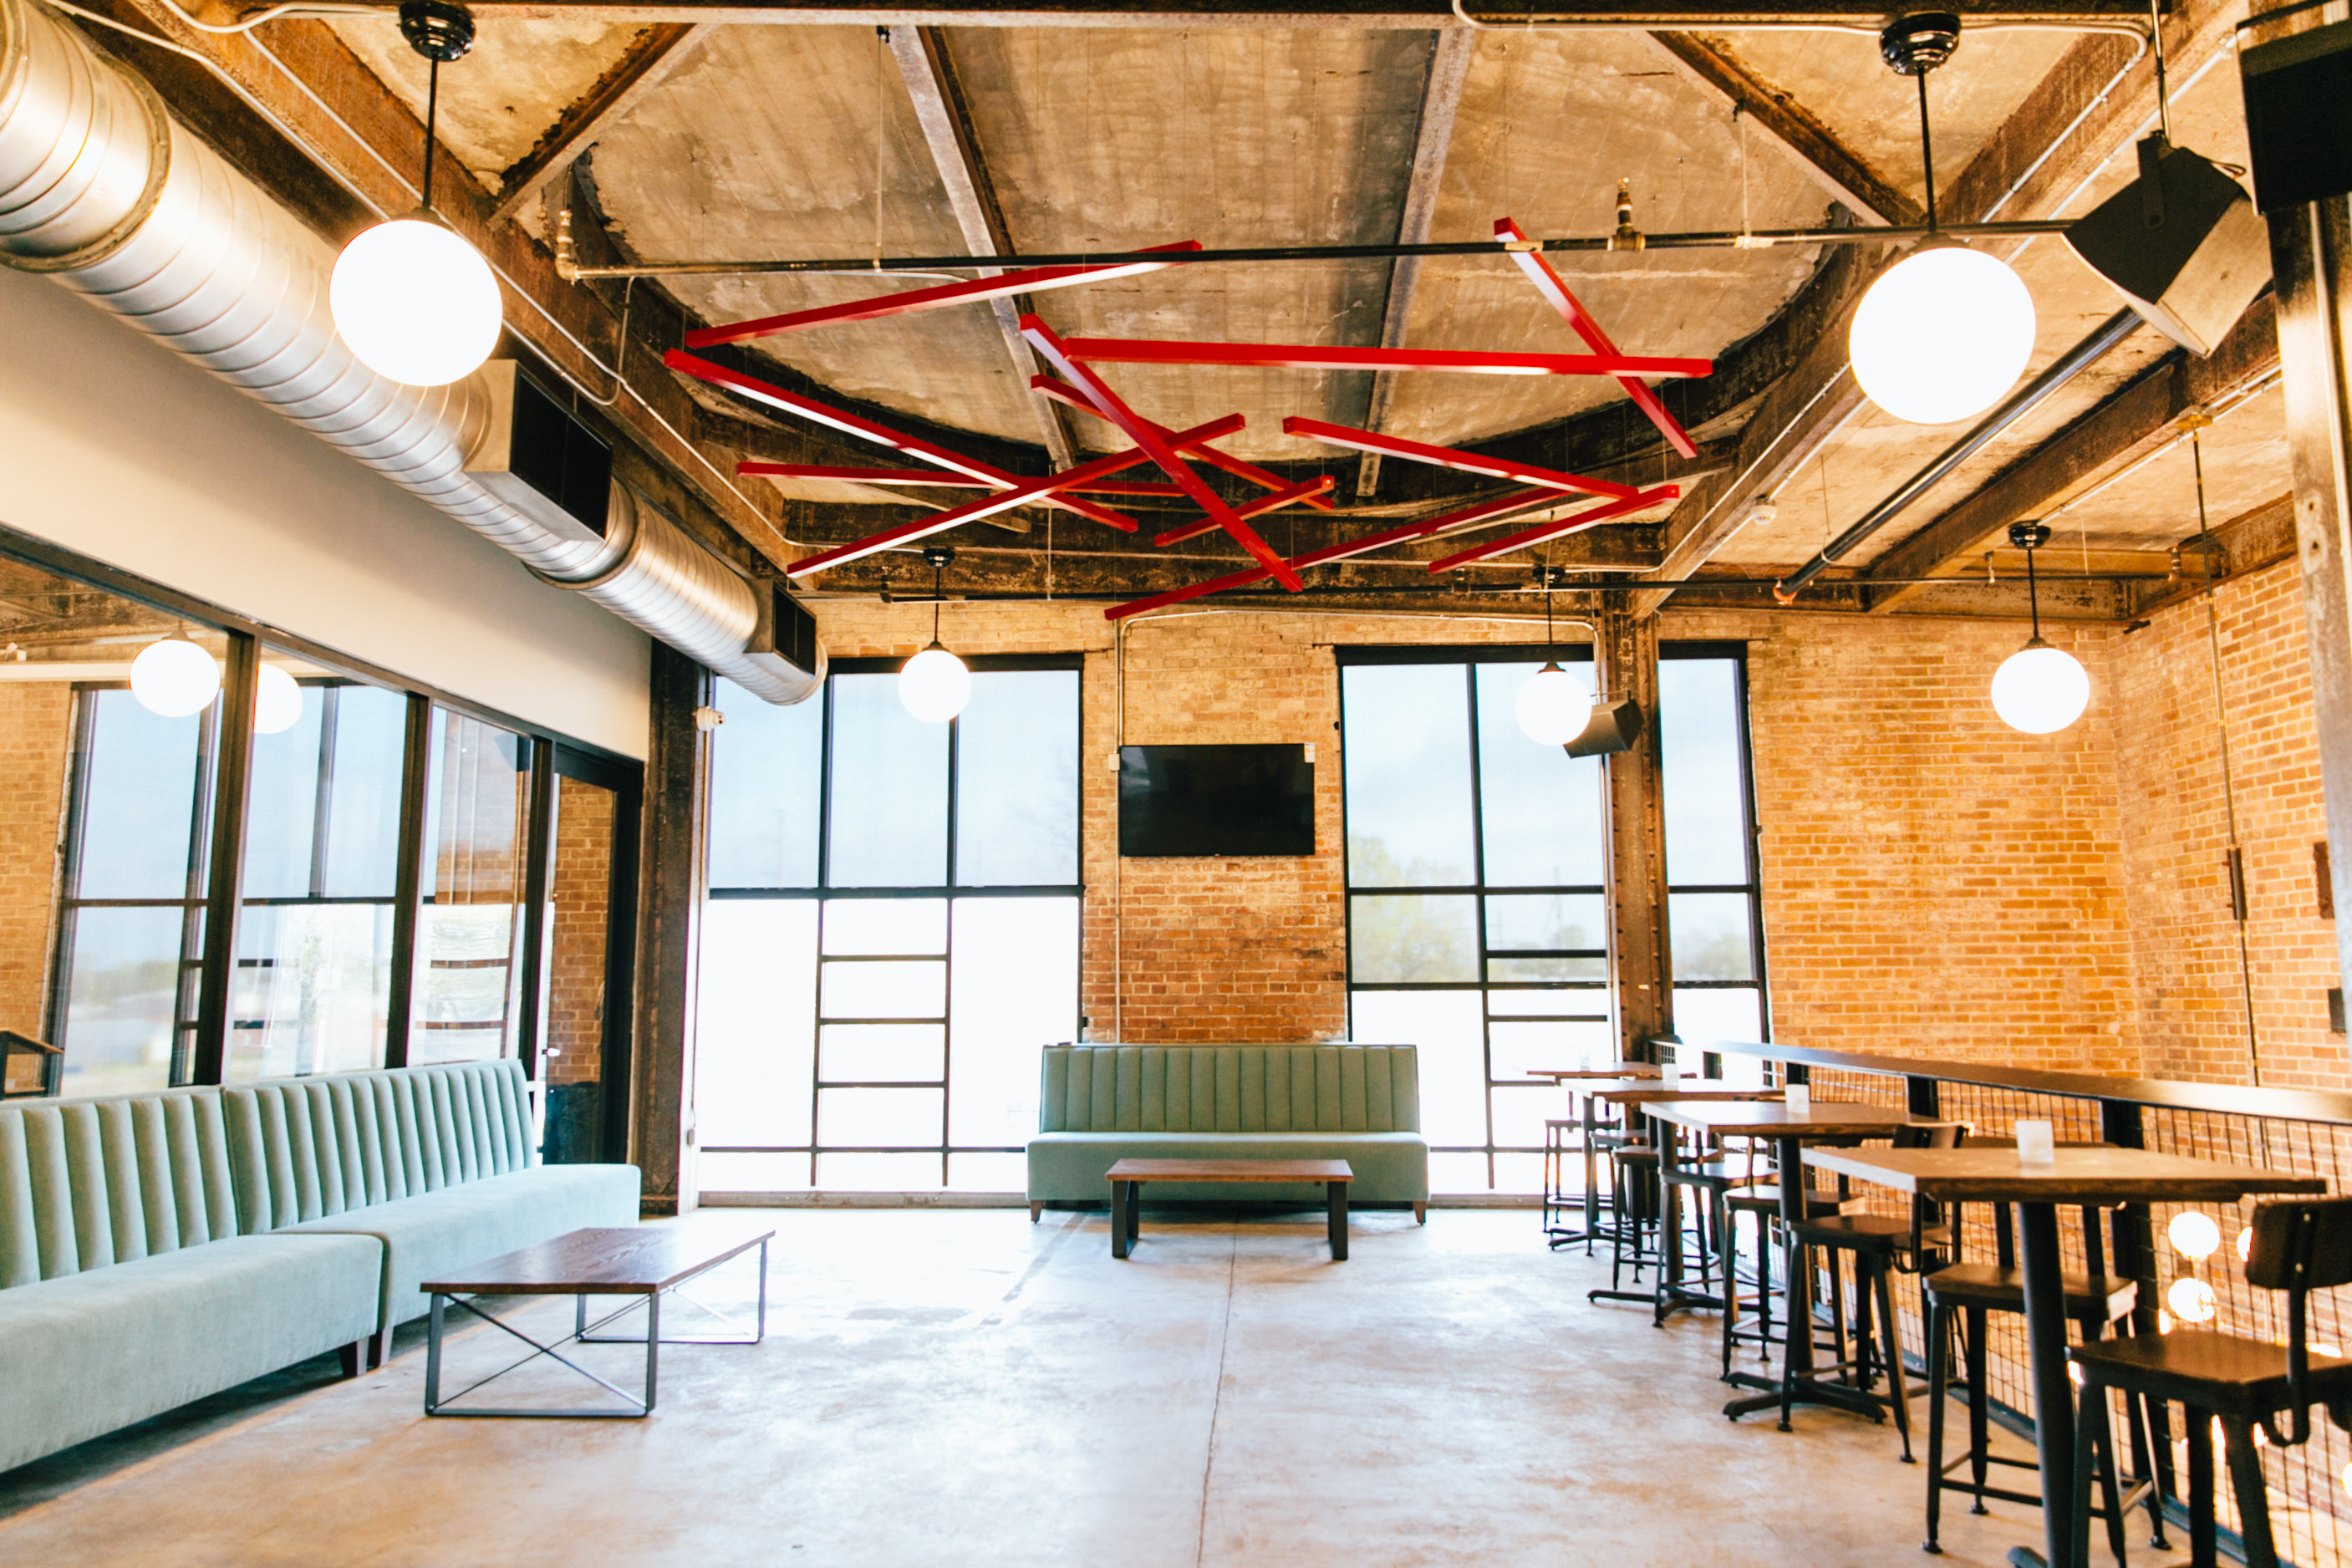 First Look: Inside Red Stick Social, one of Mid City's biggest